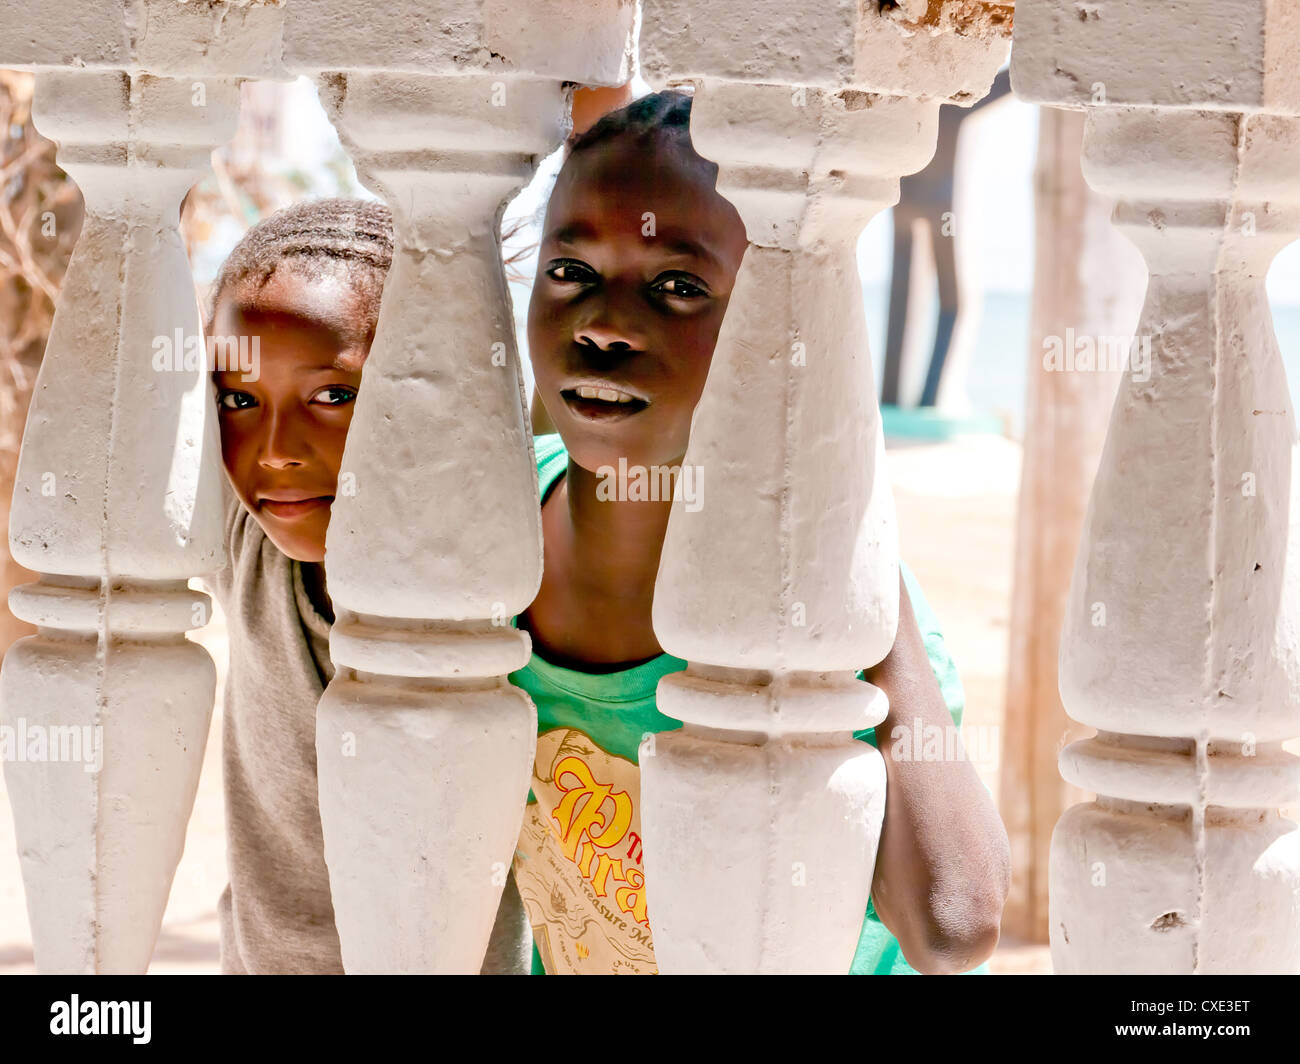 Two young boys looking through balustrades on the Island of Albreda, Gambia Stock Photo